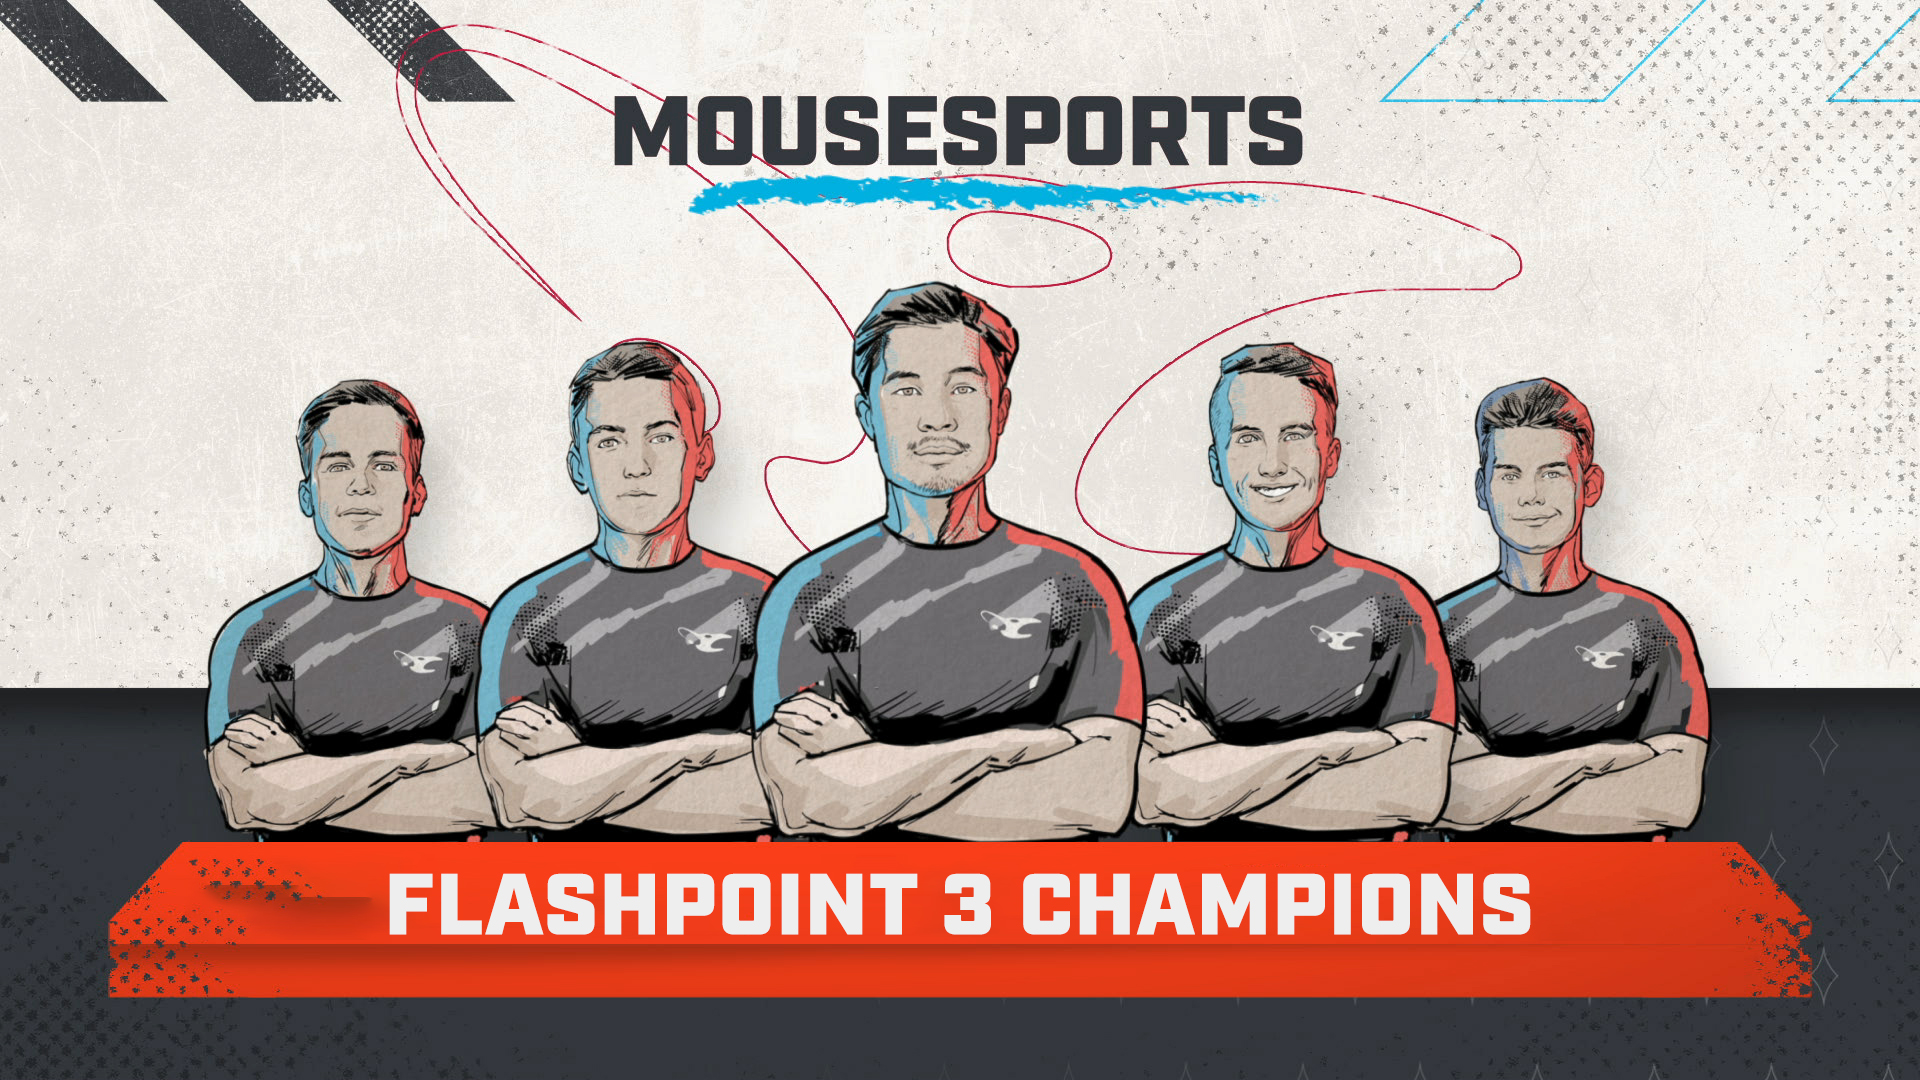 Flashpoint 3 Champions Mousesports